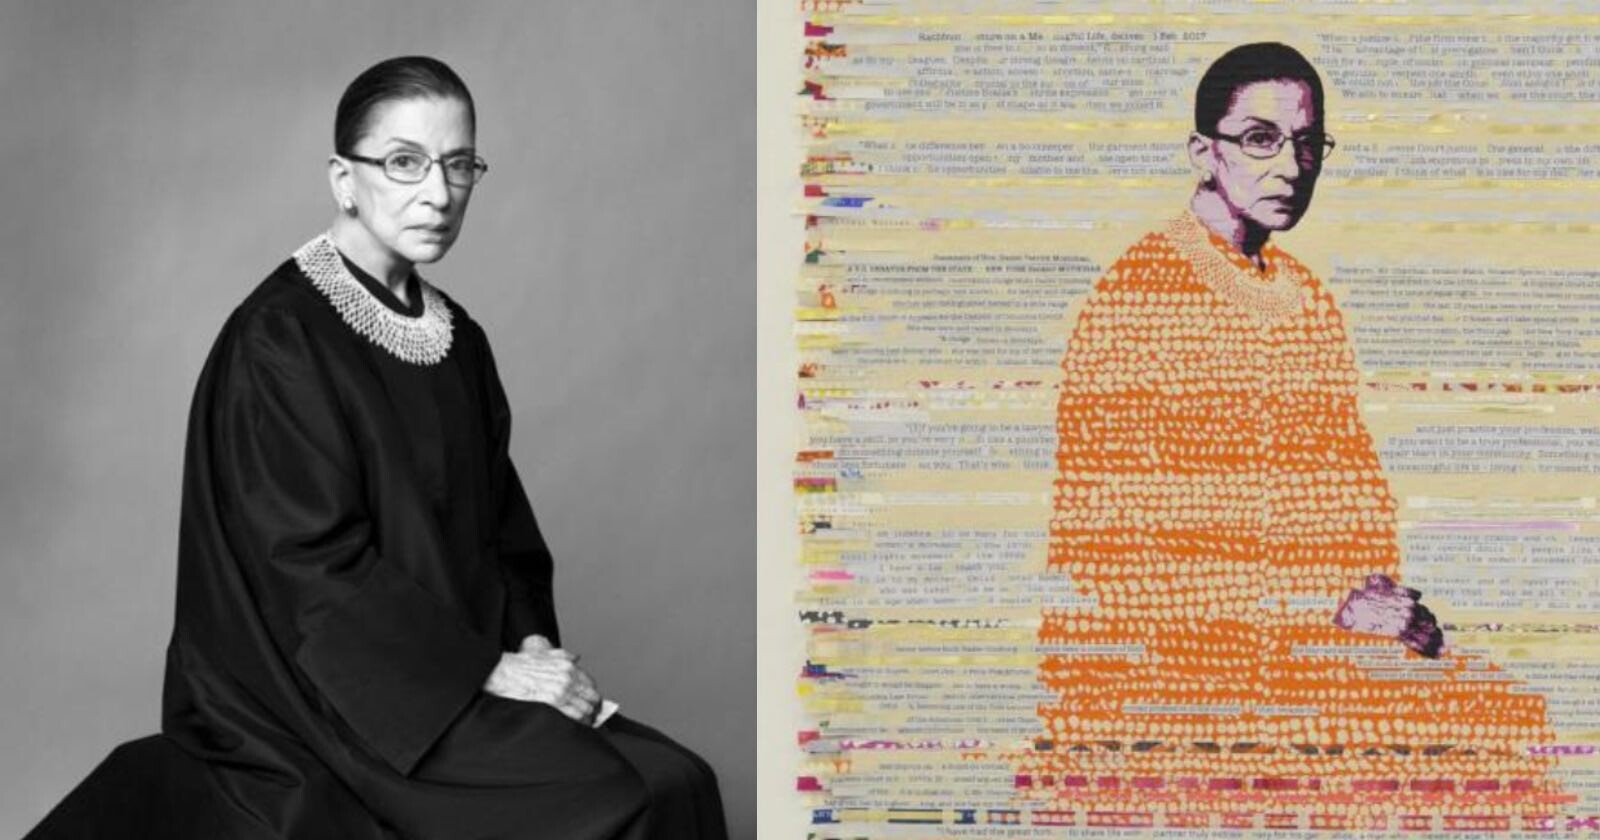 Artist Escapes Lawsuit Over Her Use of Iconic Ruth Bader Ginsberg Photo